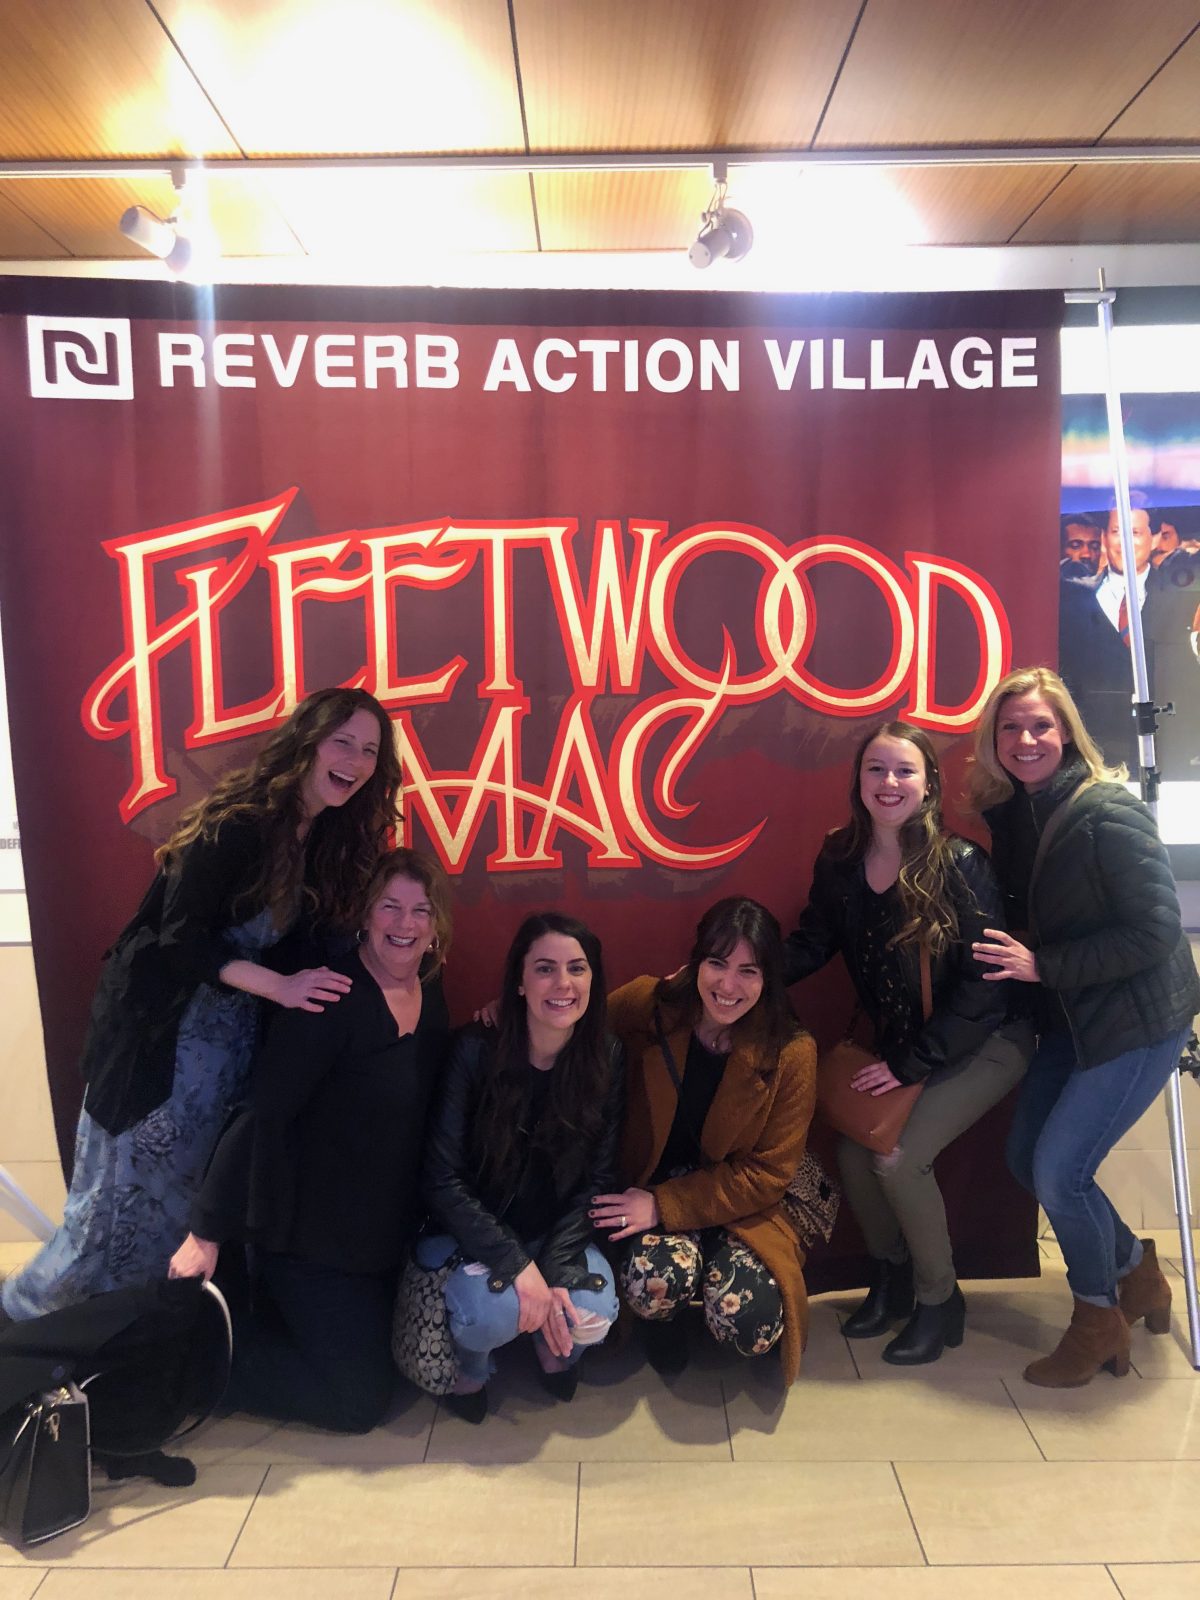 Women posing and laughing in front of Fleetwood Mac sign